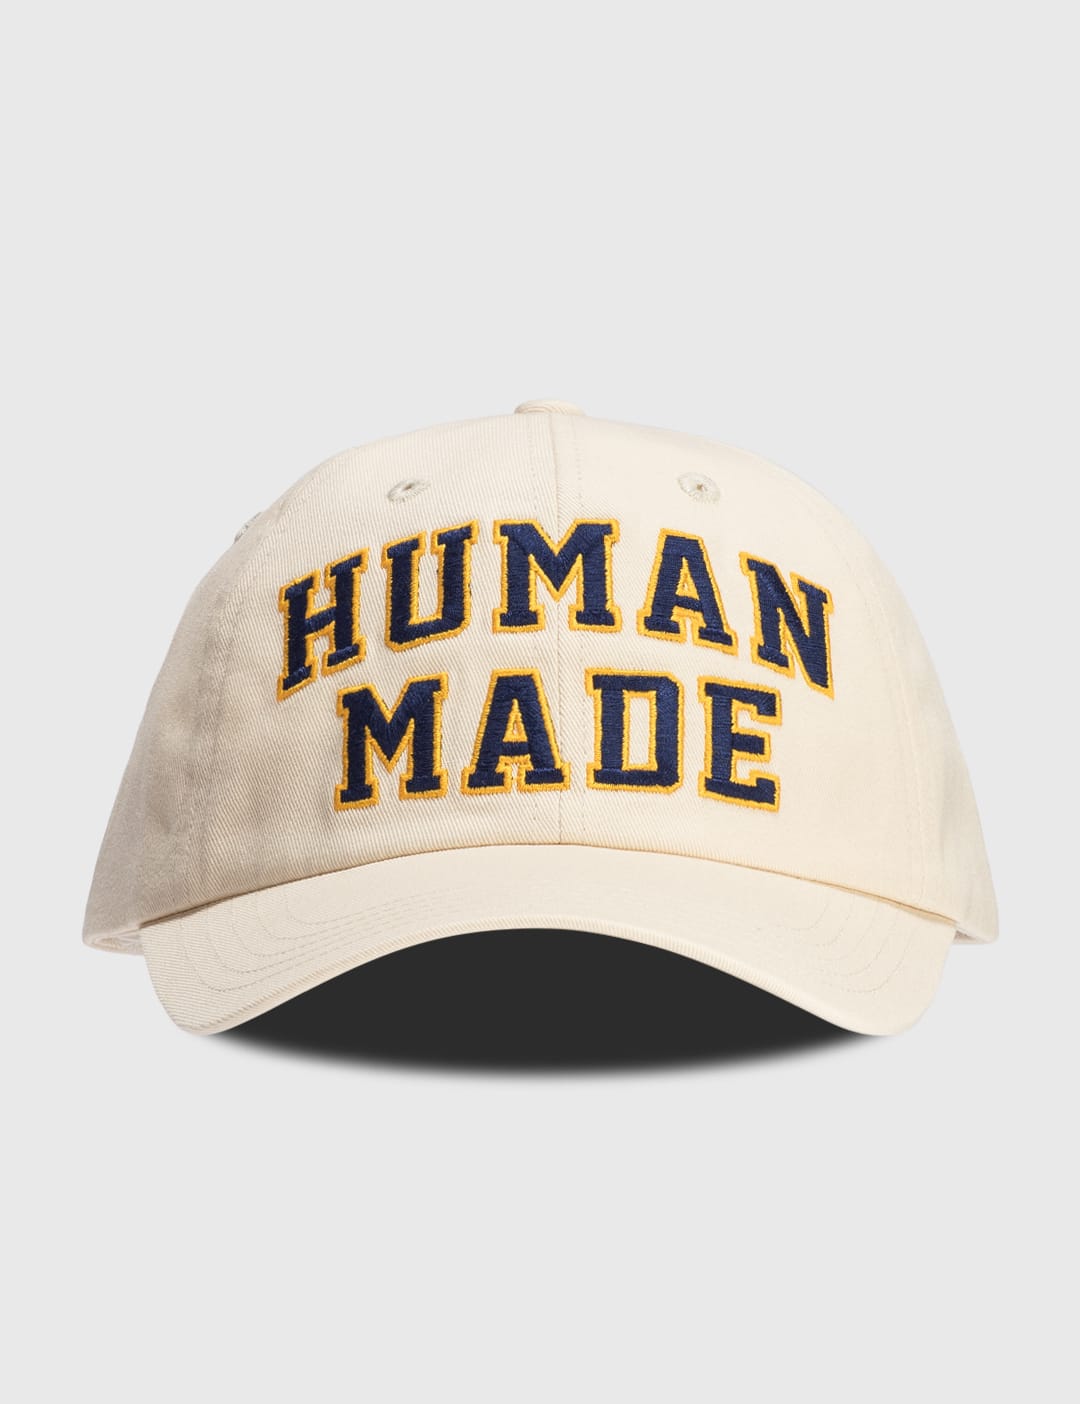 Human Made   6 Panel Twill Cap #2   HBX   Globally Curated Fashion